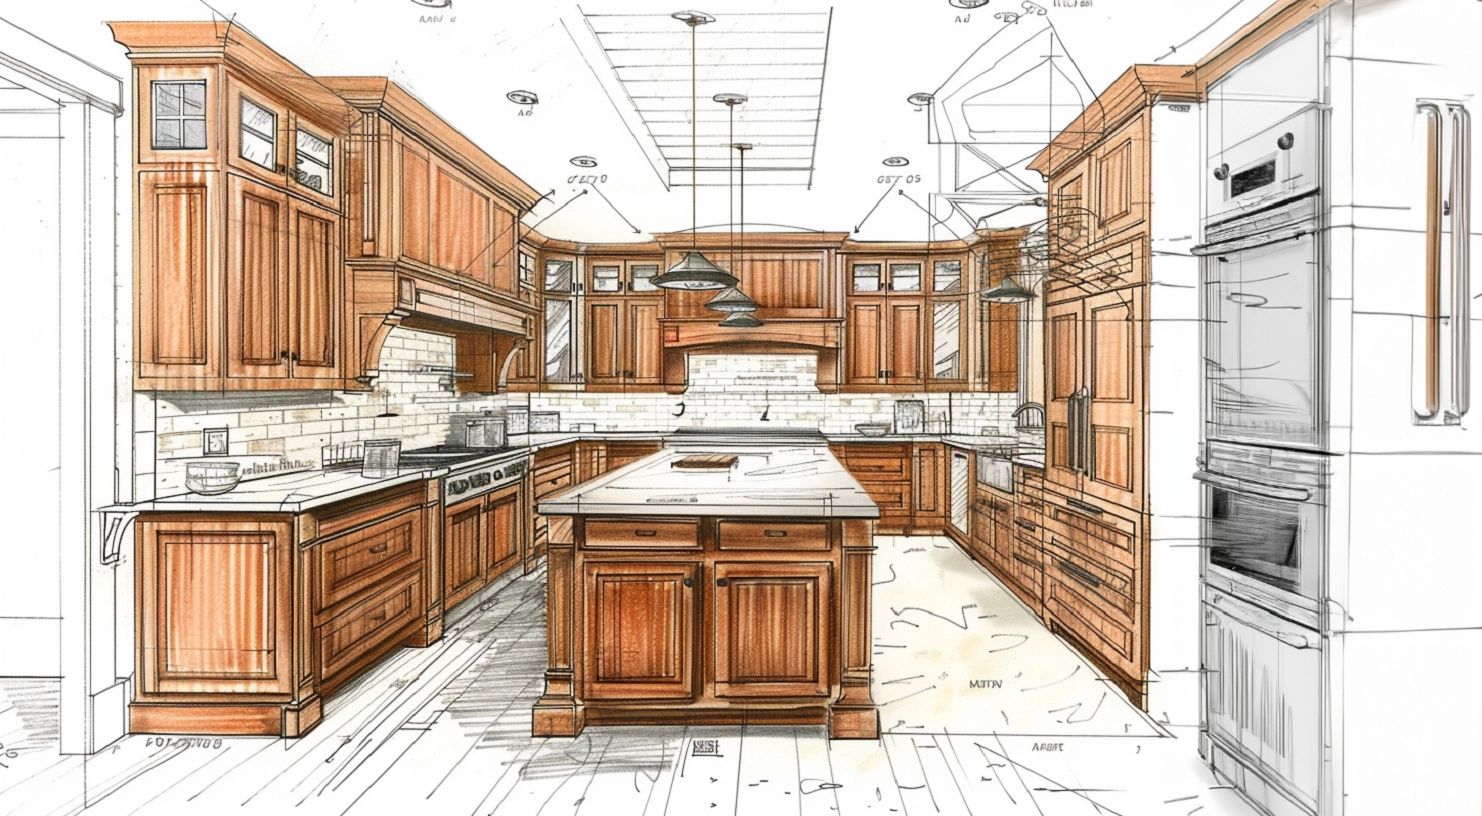 Three-dimensional sketch of a traditional kitchen with wood cabinets, a central island, pendant lights, and built-in ovens